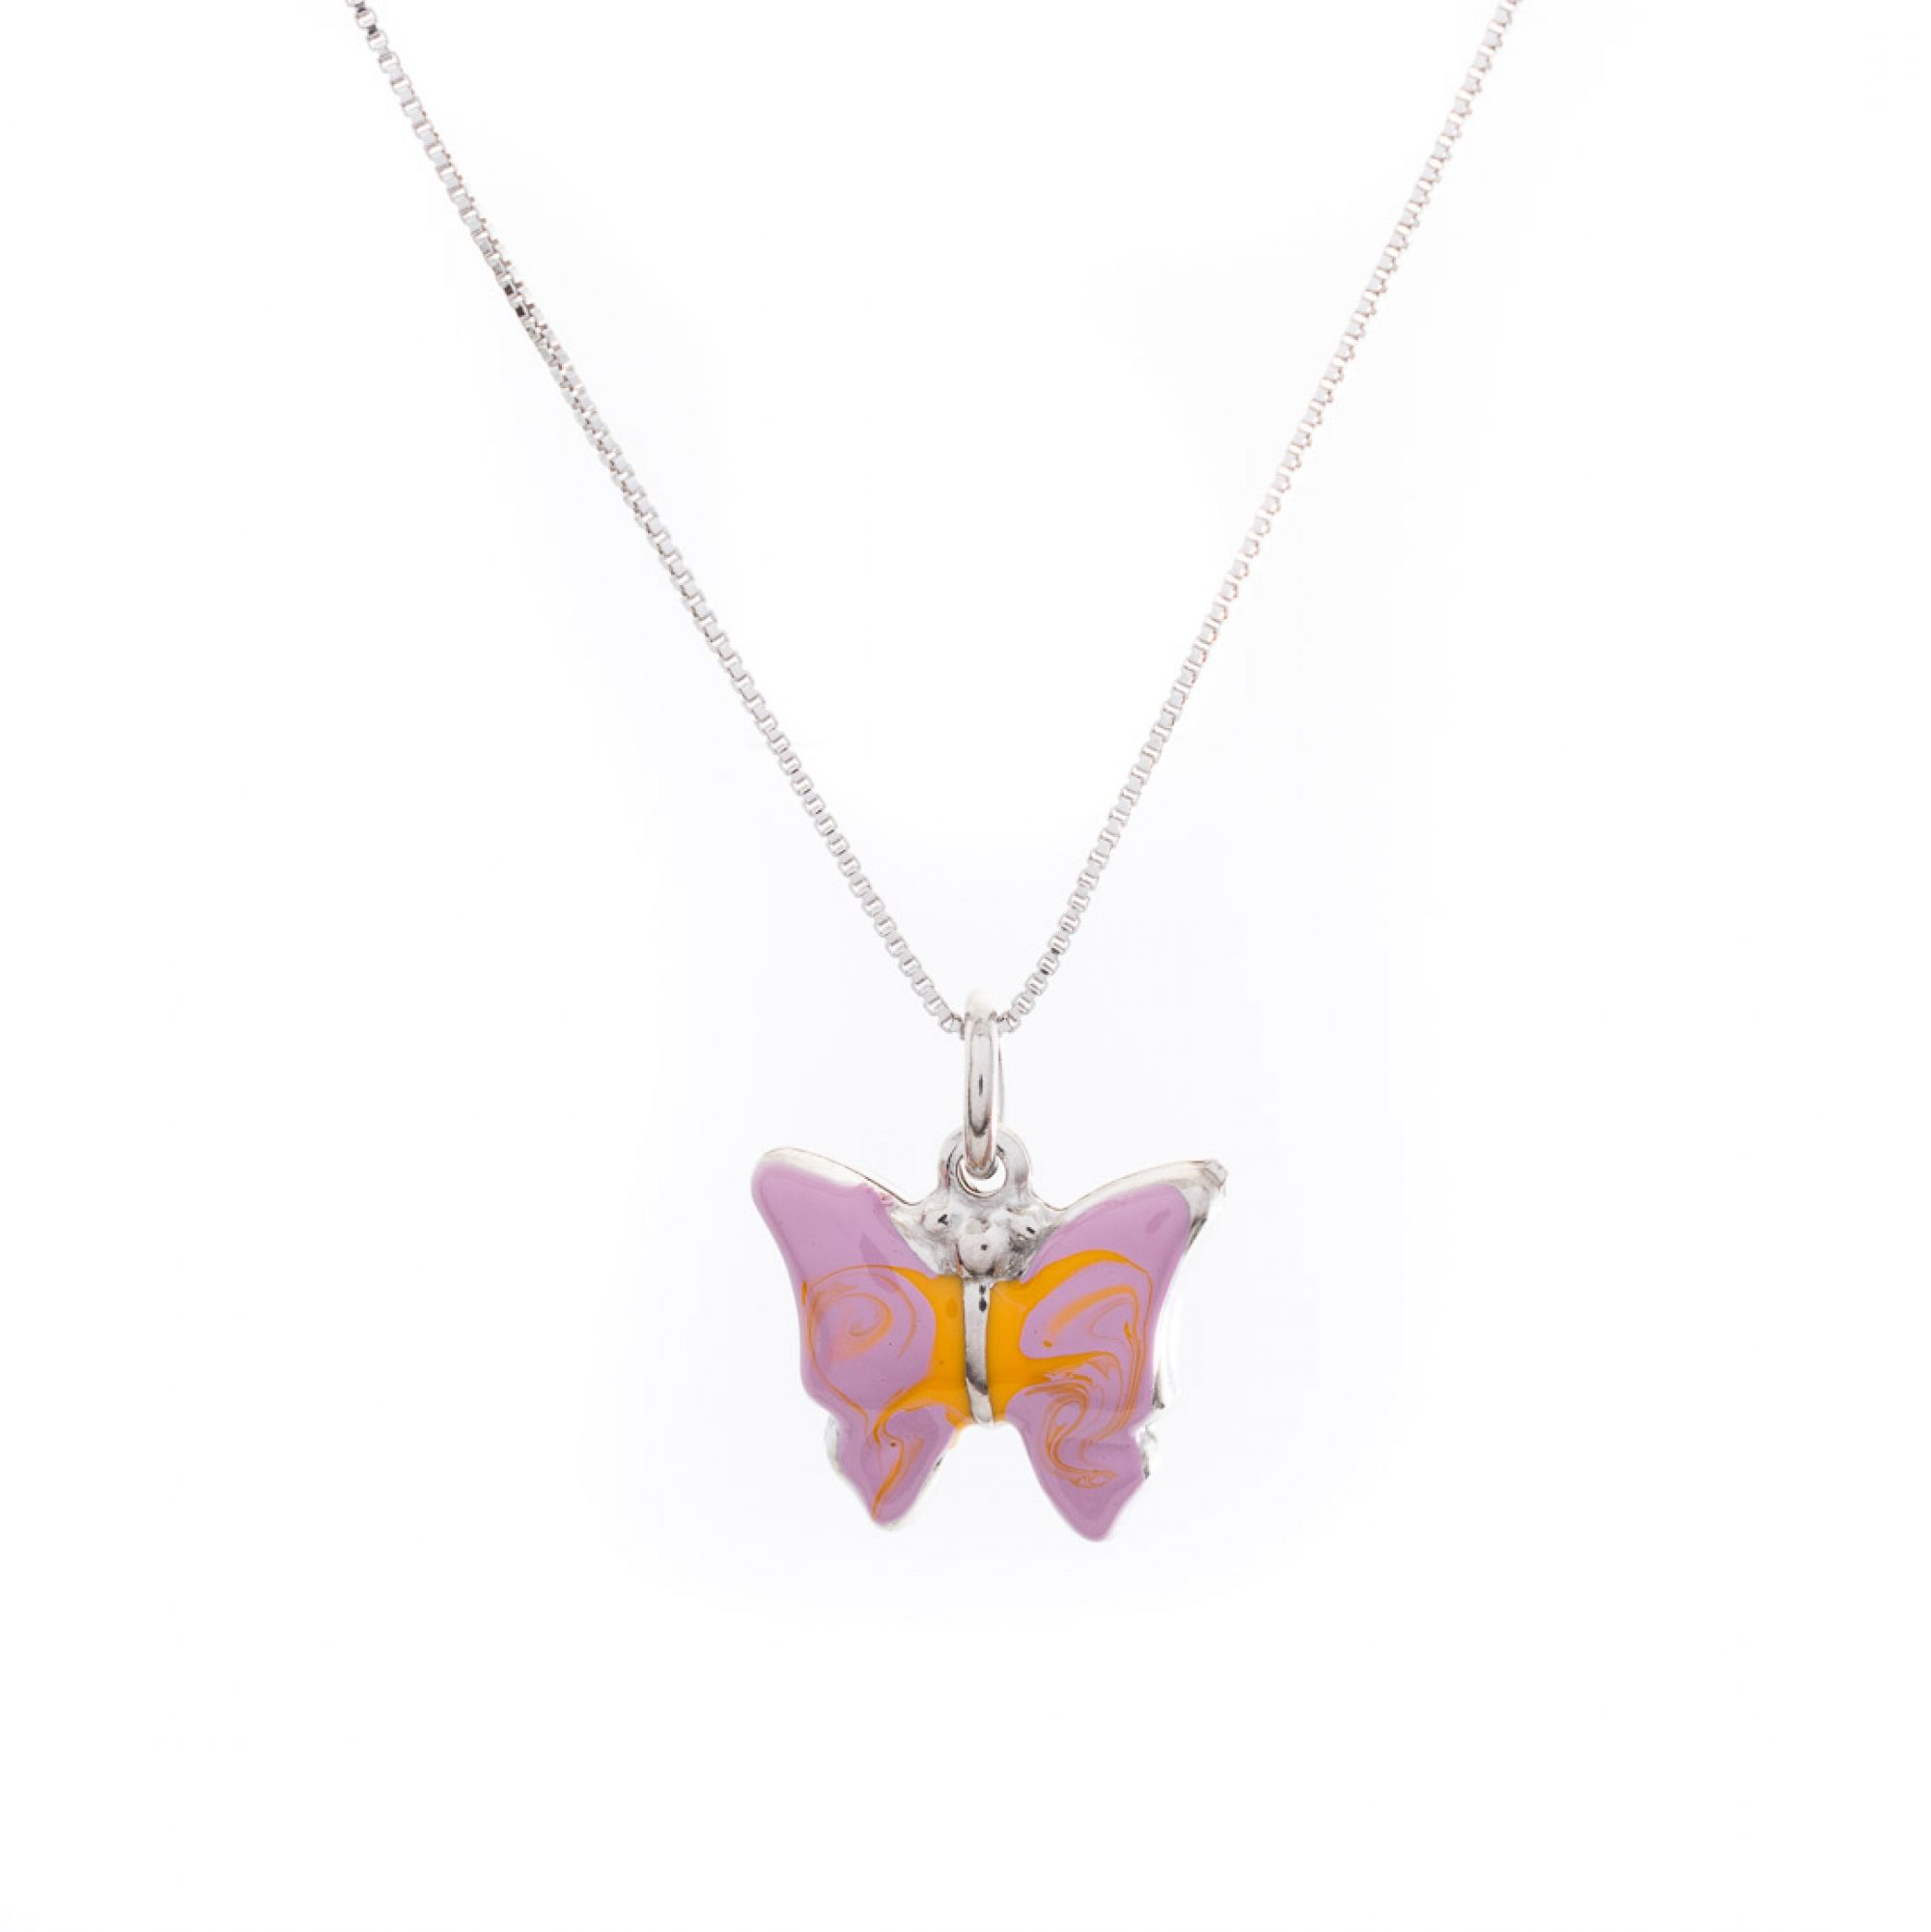 Butterfly necklace with enamel